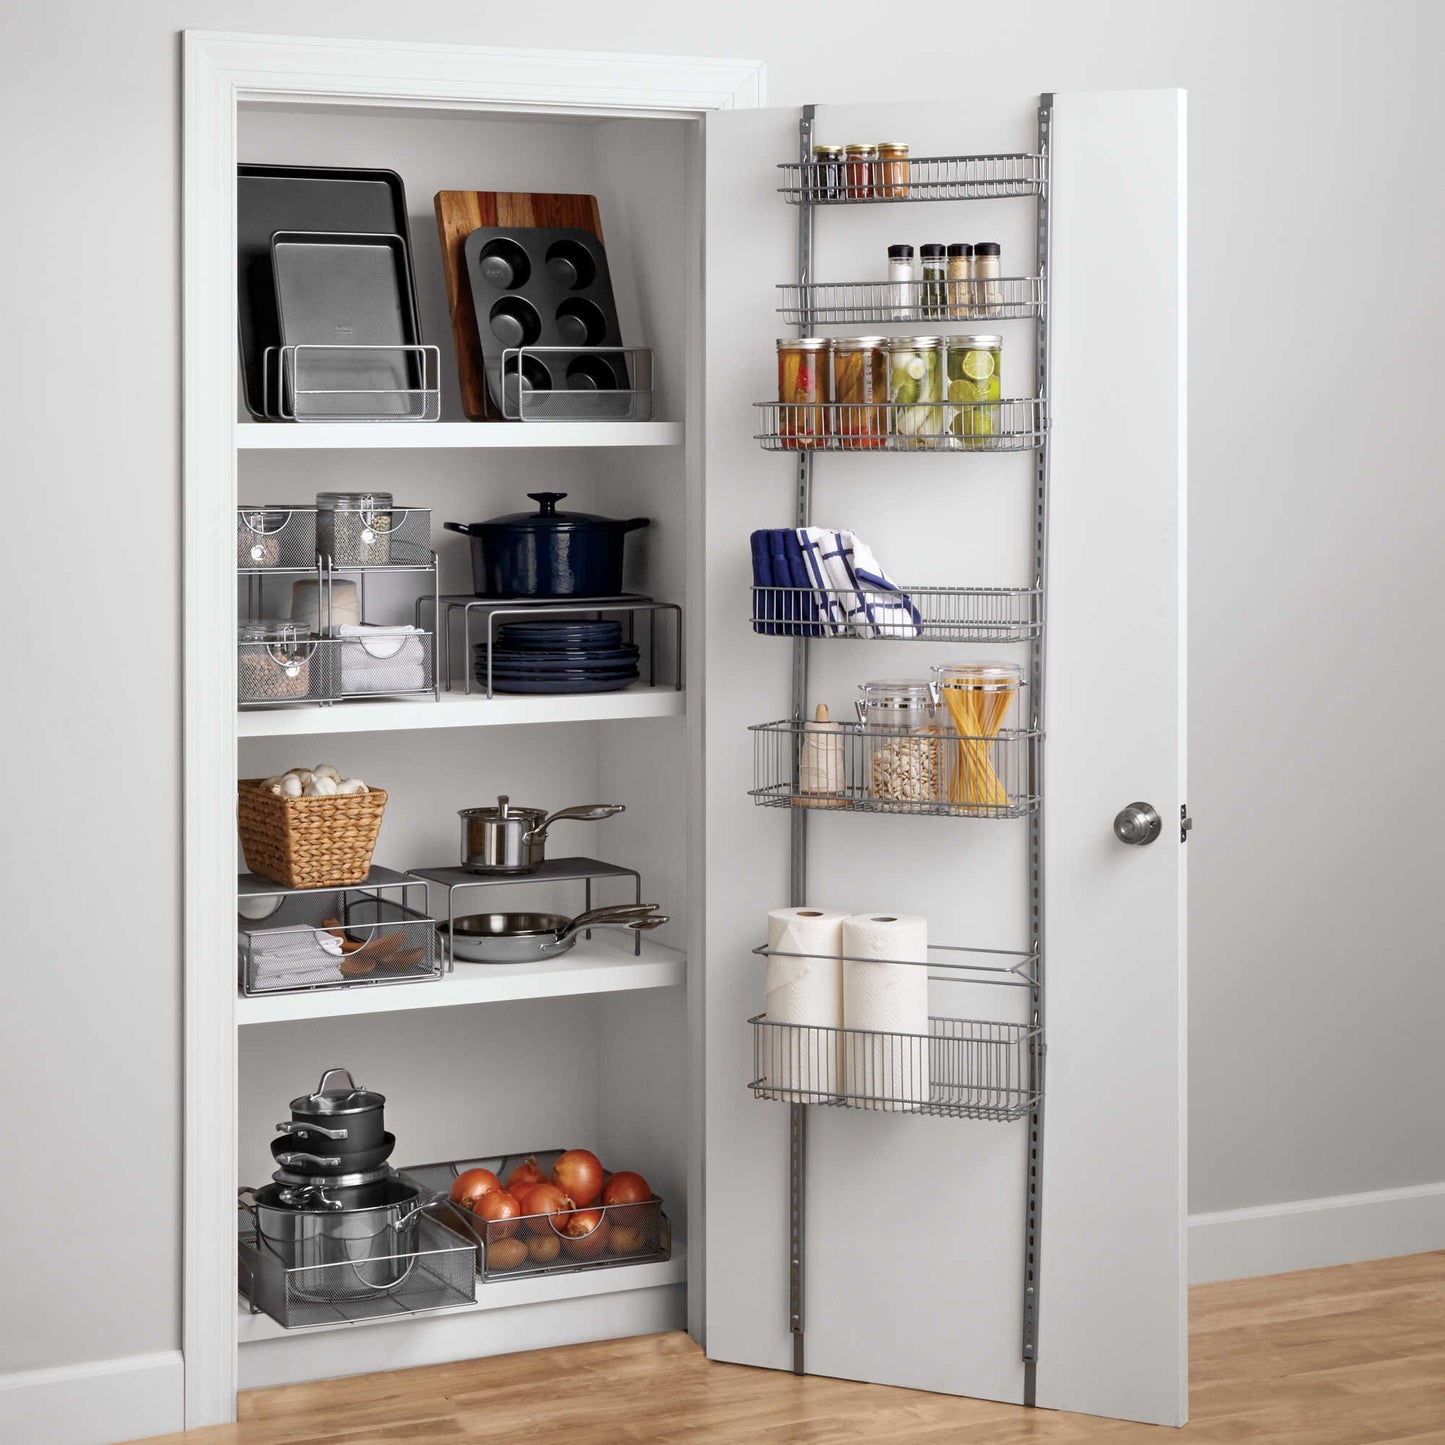 Discover the best premium over the door steel frame kitchen pantry and bath room organizer in satin nickel adjustable shelf system made of solid steel hung or door mounted option